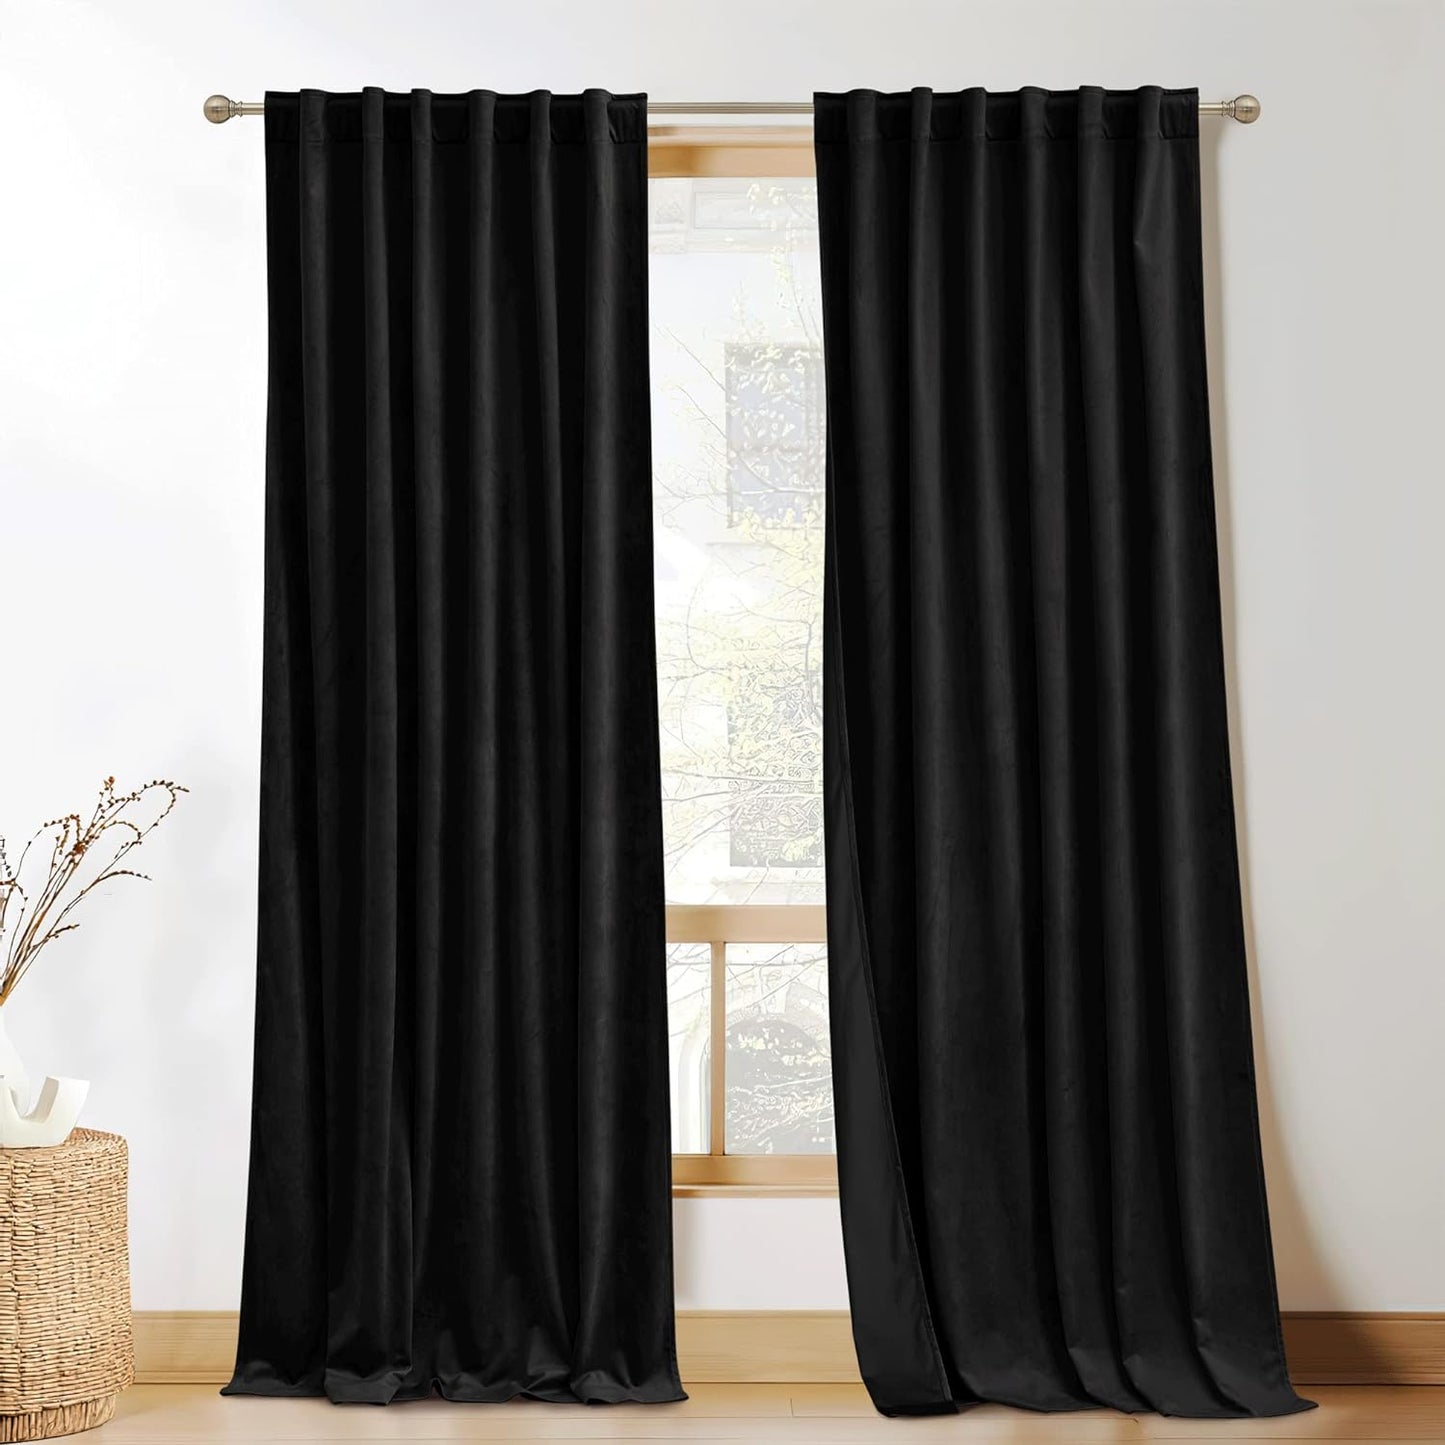 KGORGE Green Velvet Curtains 84 Inches Super Soft Room Darkening Thermal Insulating Window Curtains & Drapes for Bedroom Living Room Backdrop Holiday Christmas Decor, Hunter Green, W 52 X L 84, 2 Pcs  KGORGE Black W 52 X L 96 